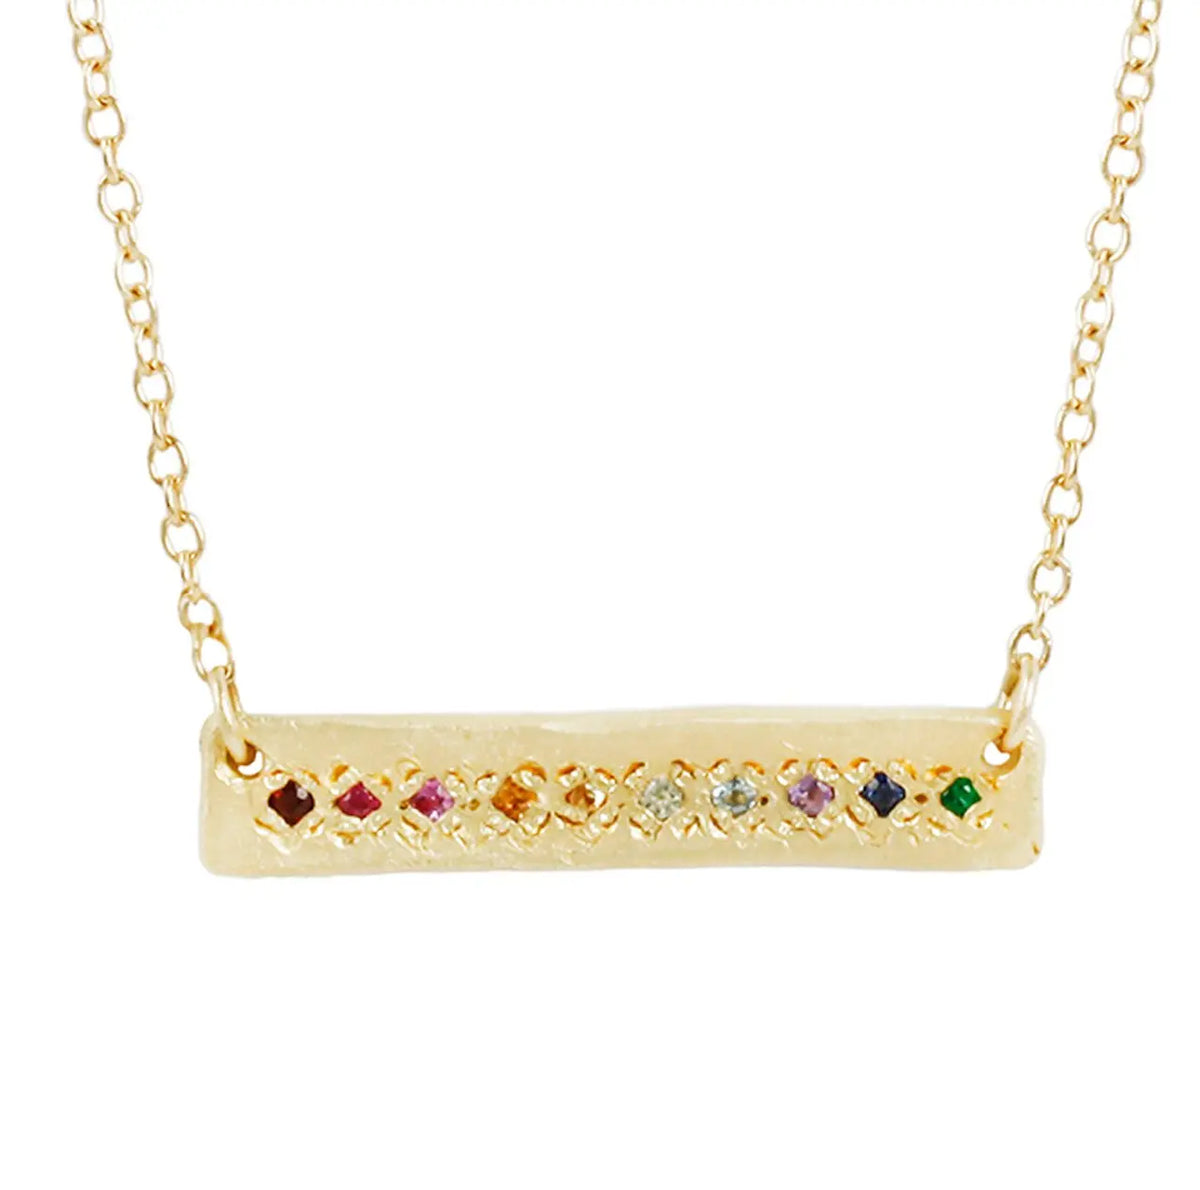 La Fortuna Necklace-Rainbow  A soft bar crafted from 18k gold is set with a glittering rainbow of precious stones, including (but not limited to) ruby, sapphire, emerald, and amethyst.  Length: 16&quot; chain  Aili Jewelry is made in New York City from recycled metals provided by sustainable certified companies and conflict free diamonds.